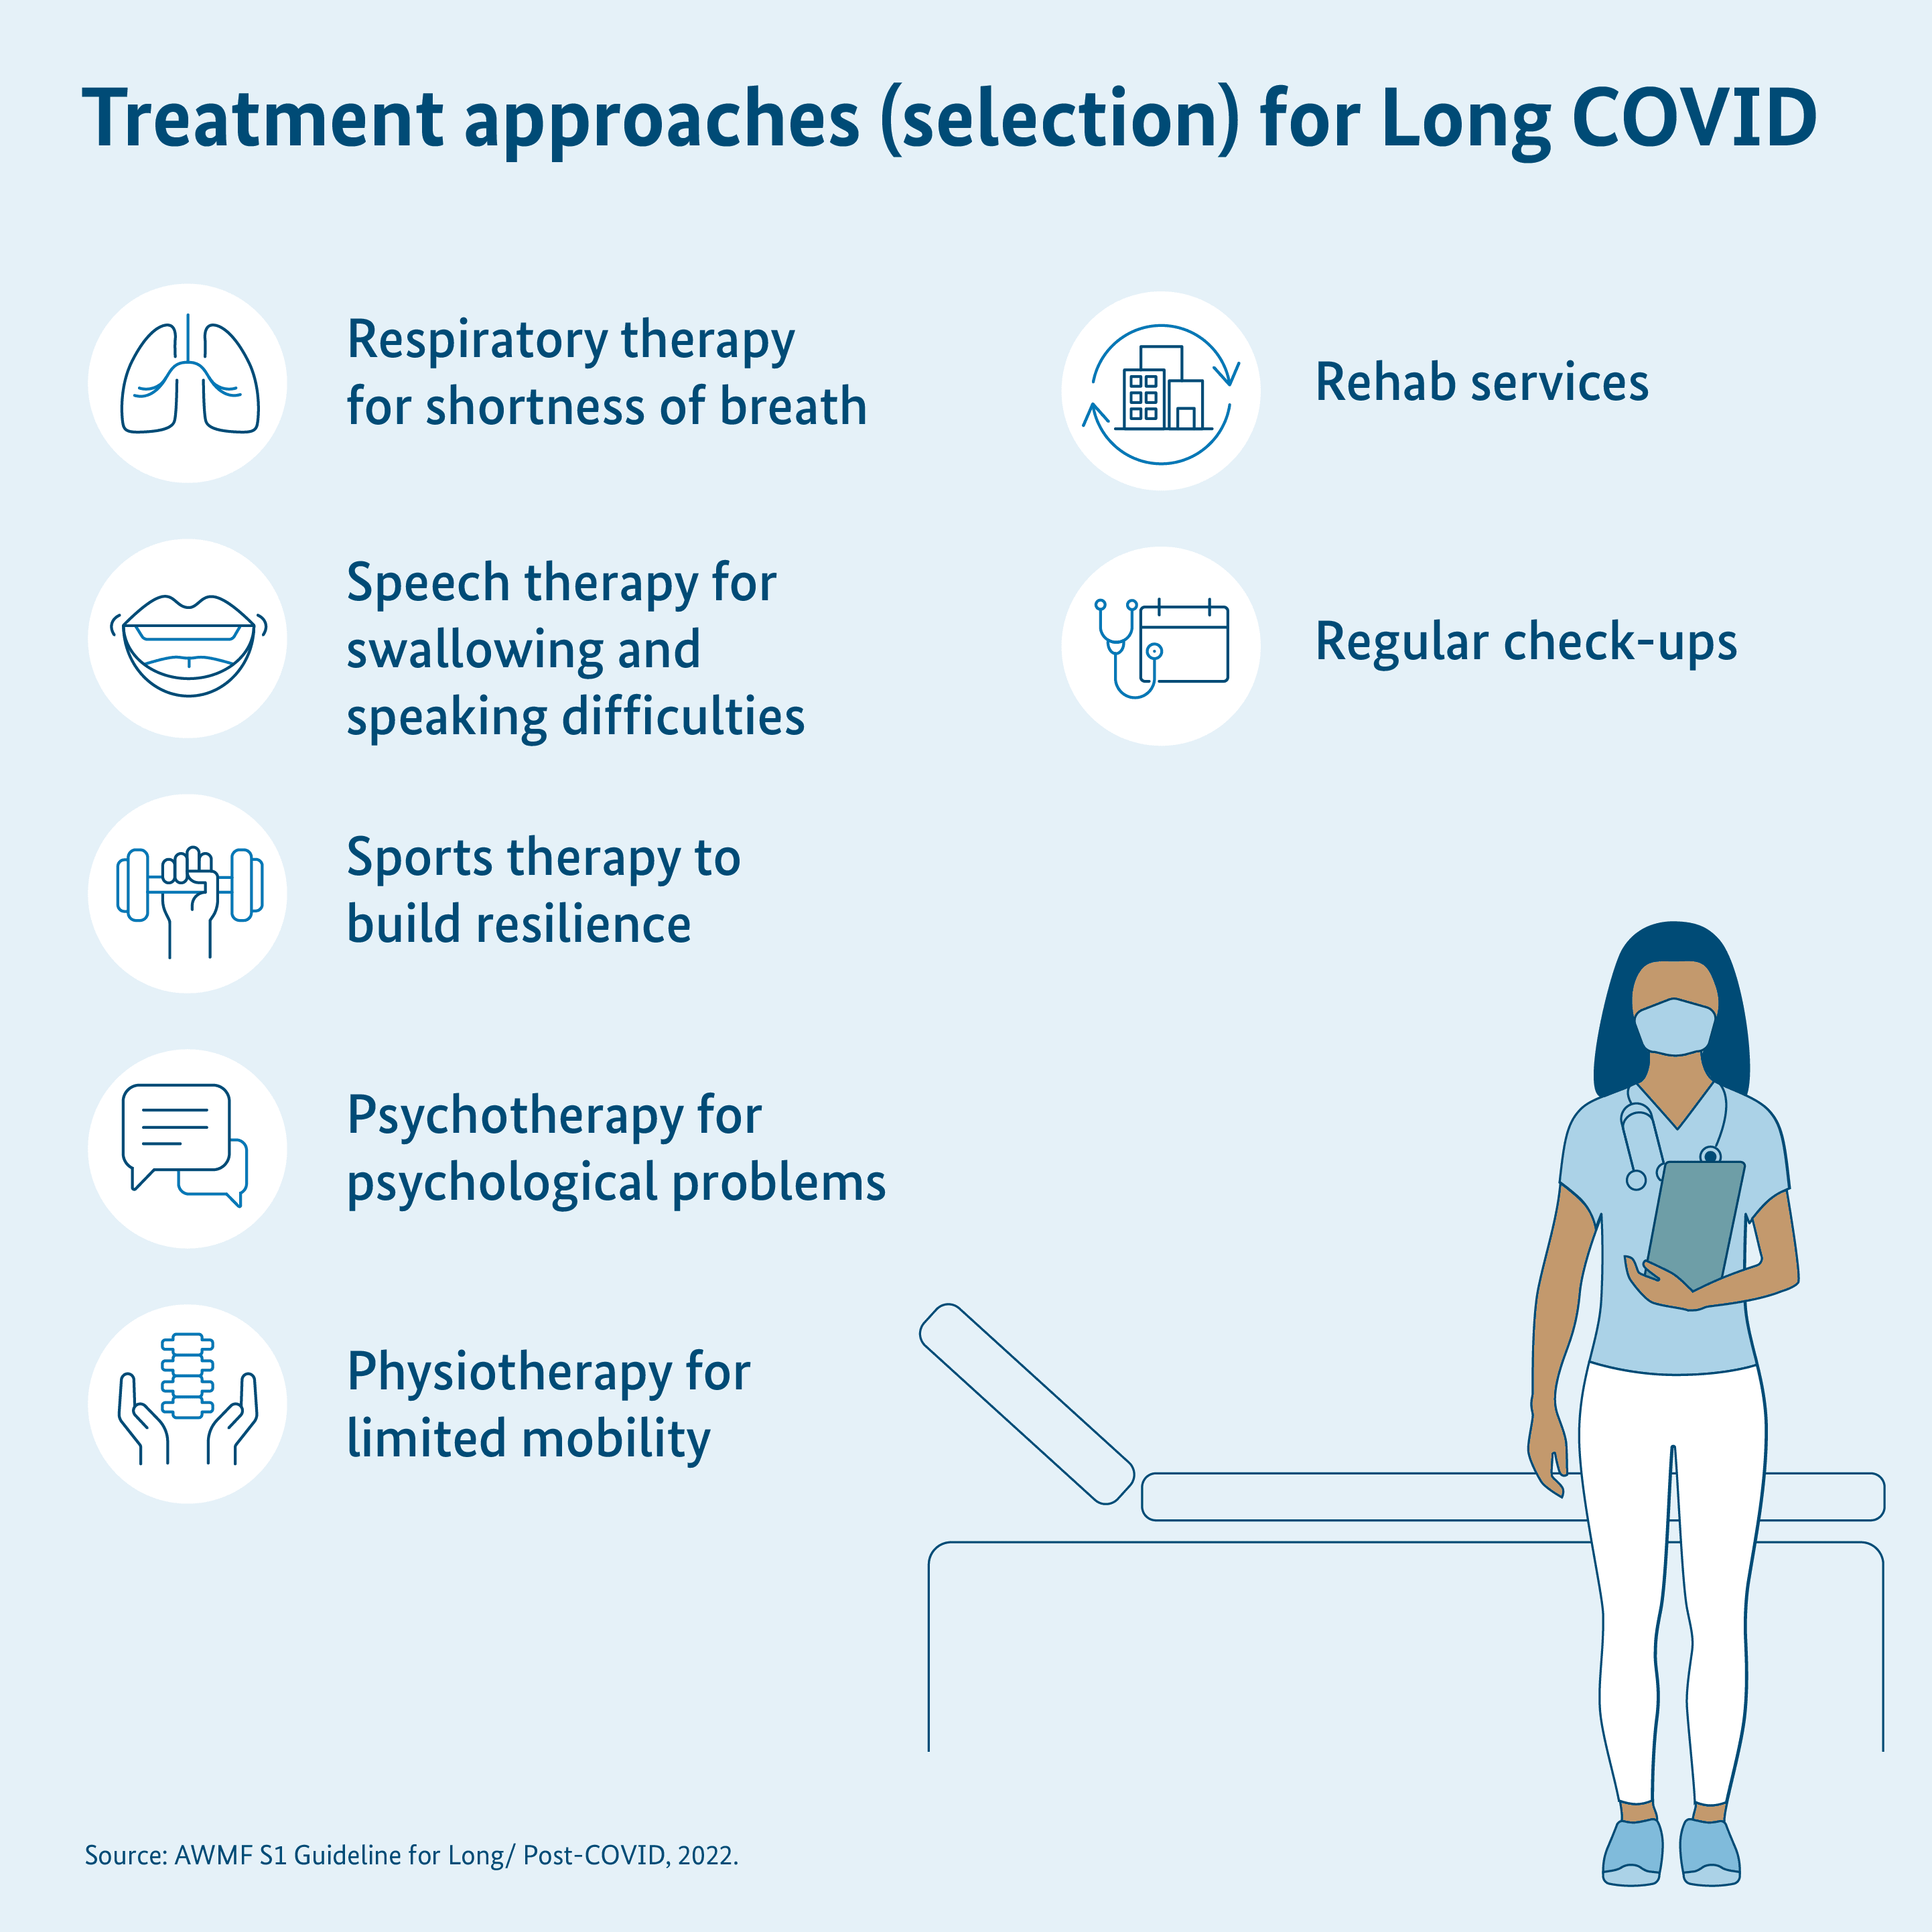 Graphic: Notes on treatment approaches for Long COVID, person with stethoscope, standing in front of treatment couch 